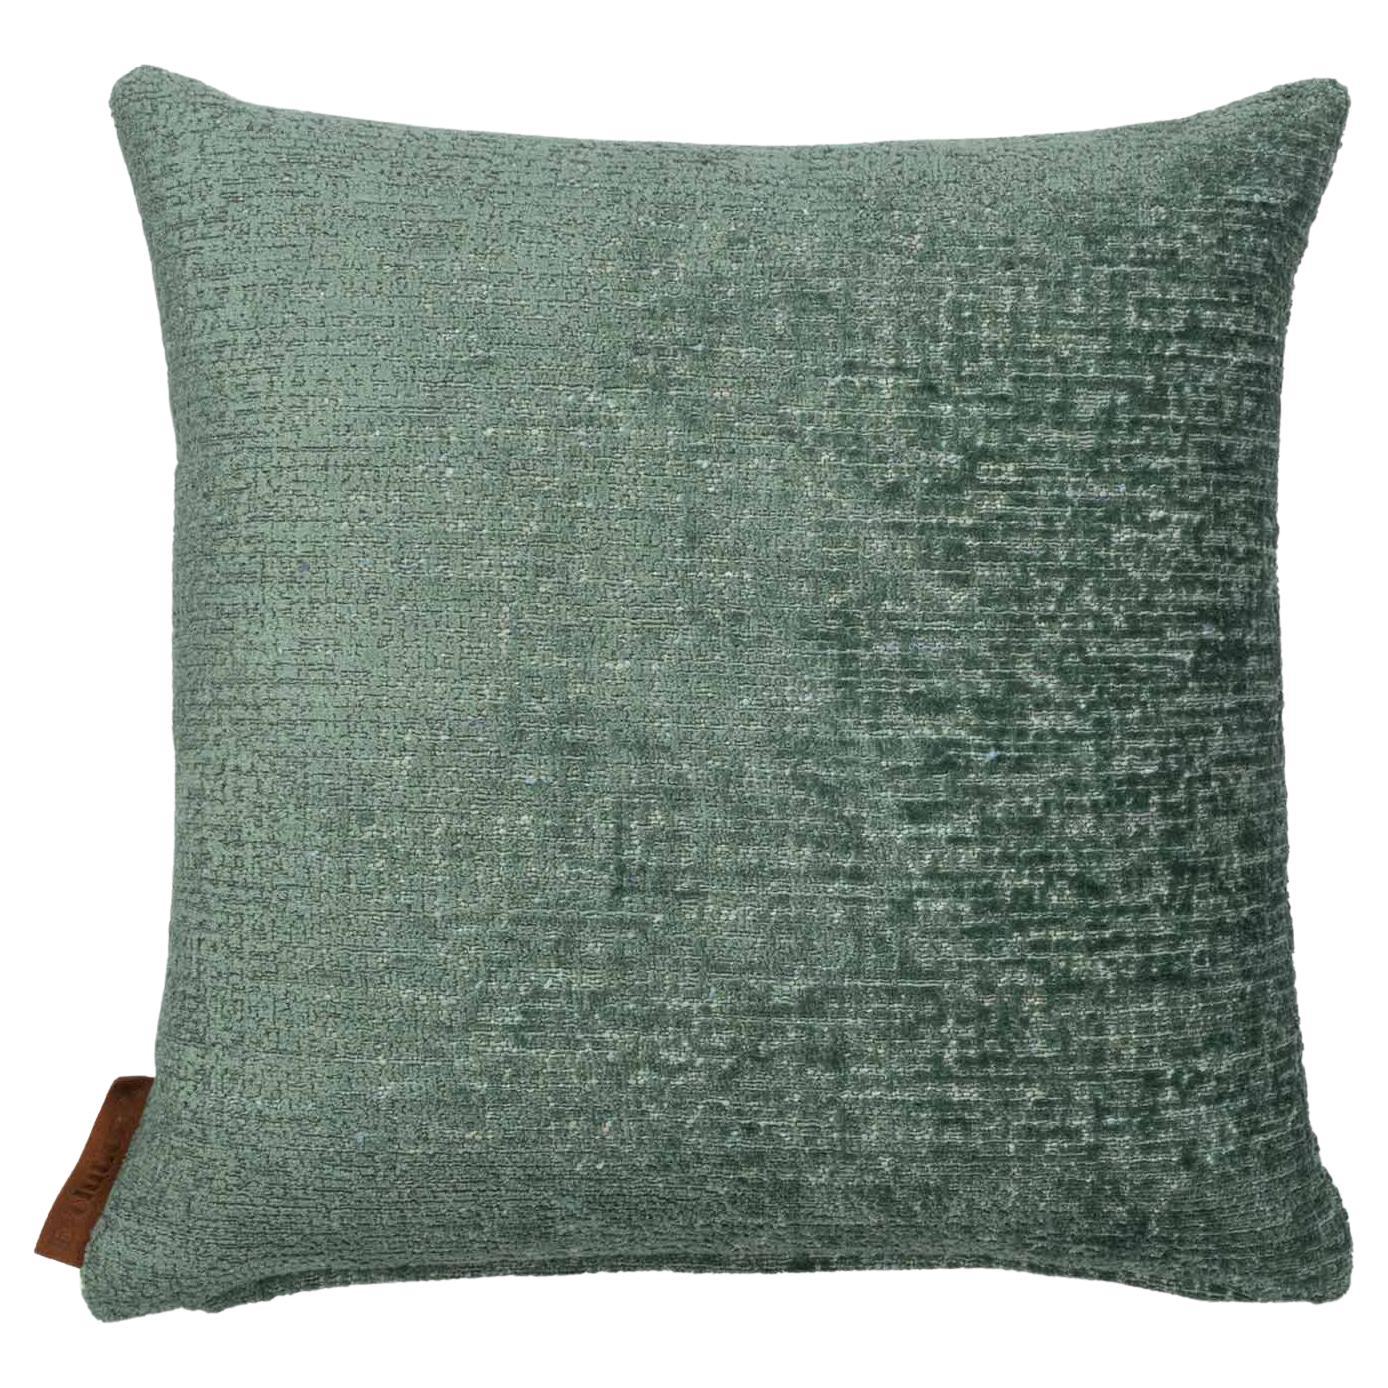 Cushion / Pillow Adventure Color Mint Green For Sale